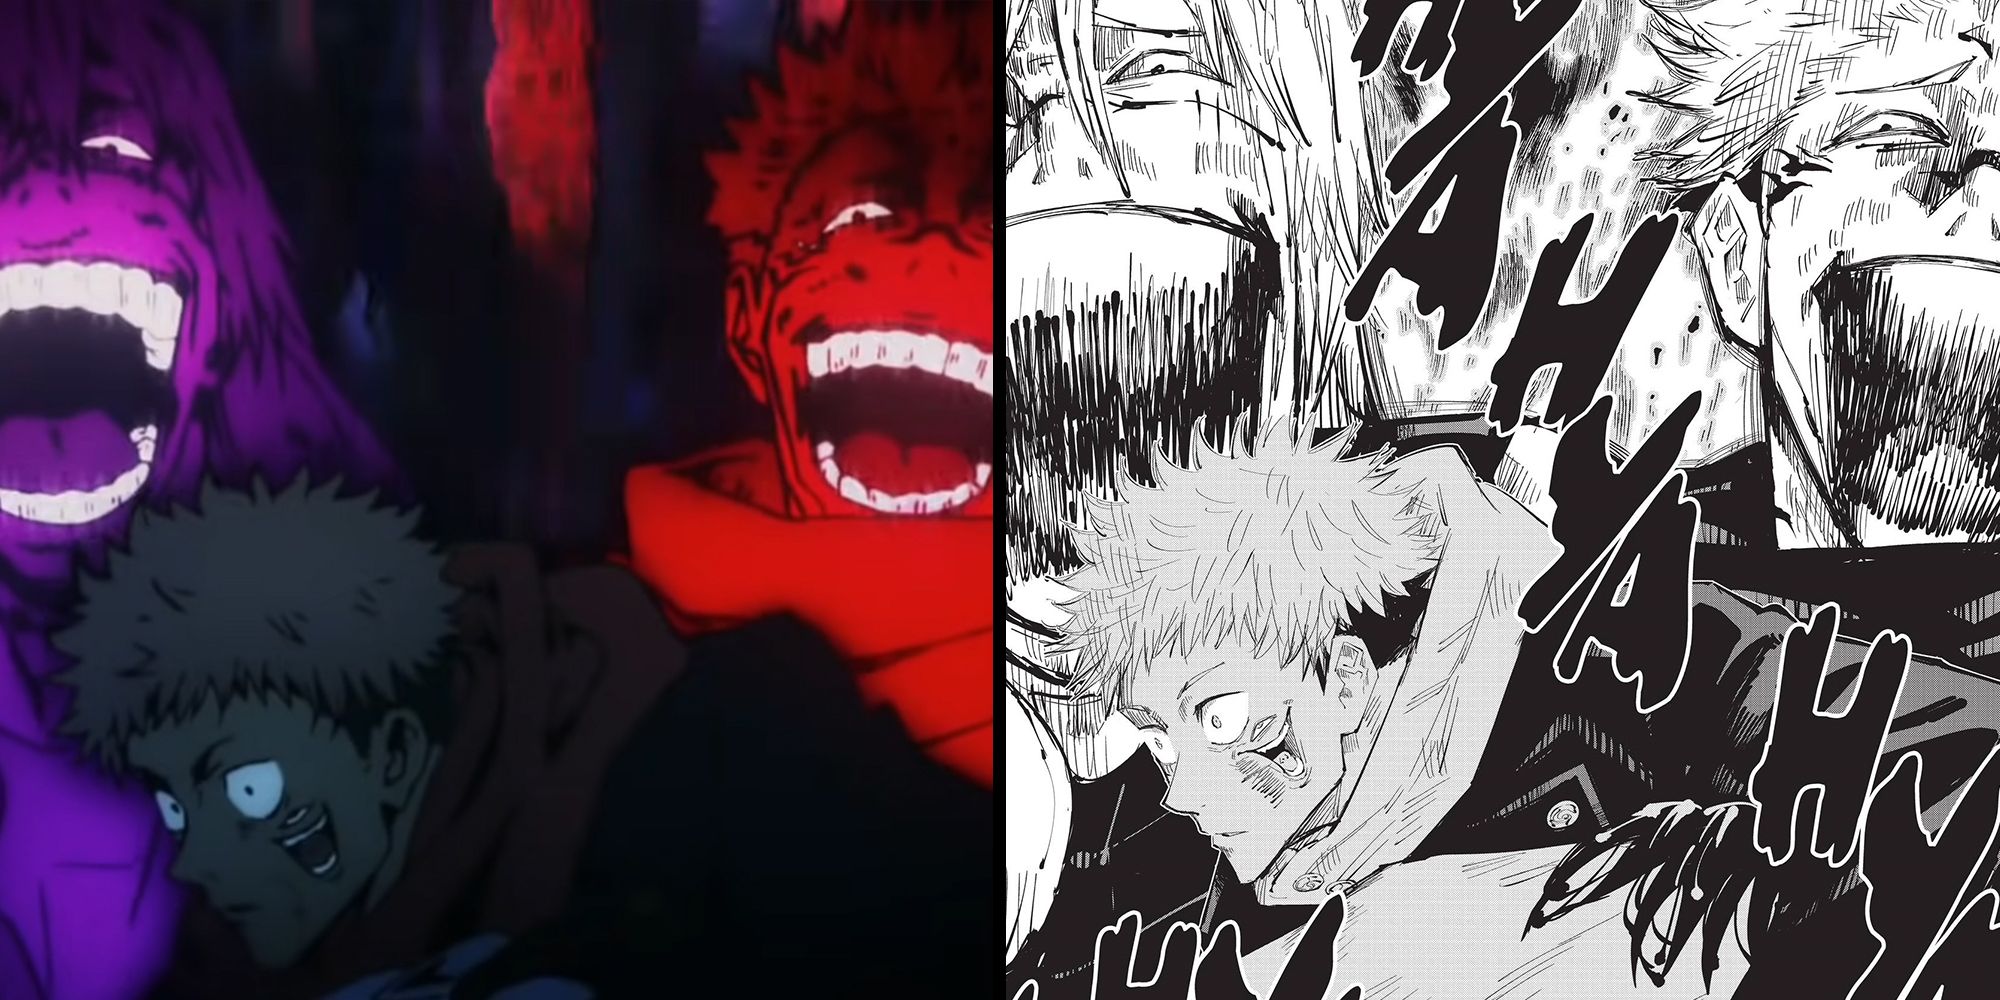 Jujutsu Kaisen - Comparing The Intentionally Messy-ness Of The Manga And Anime